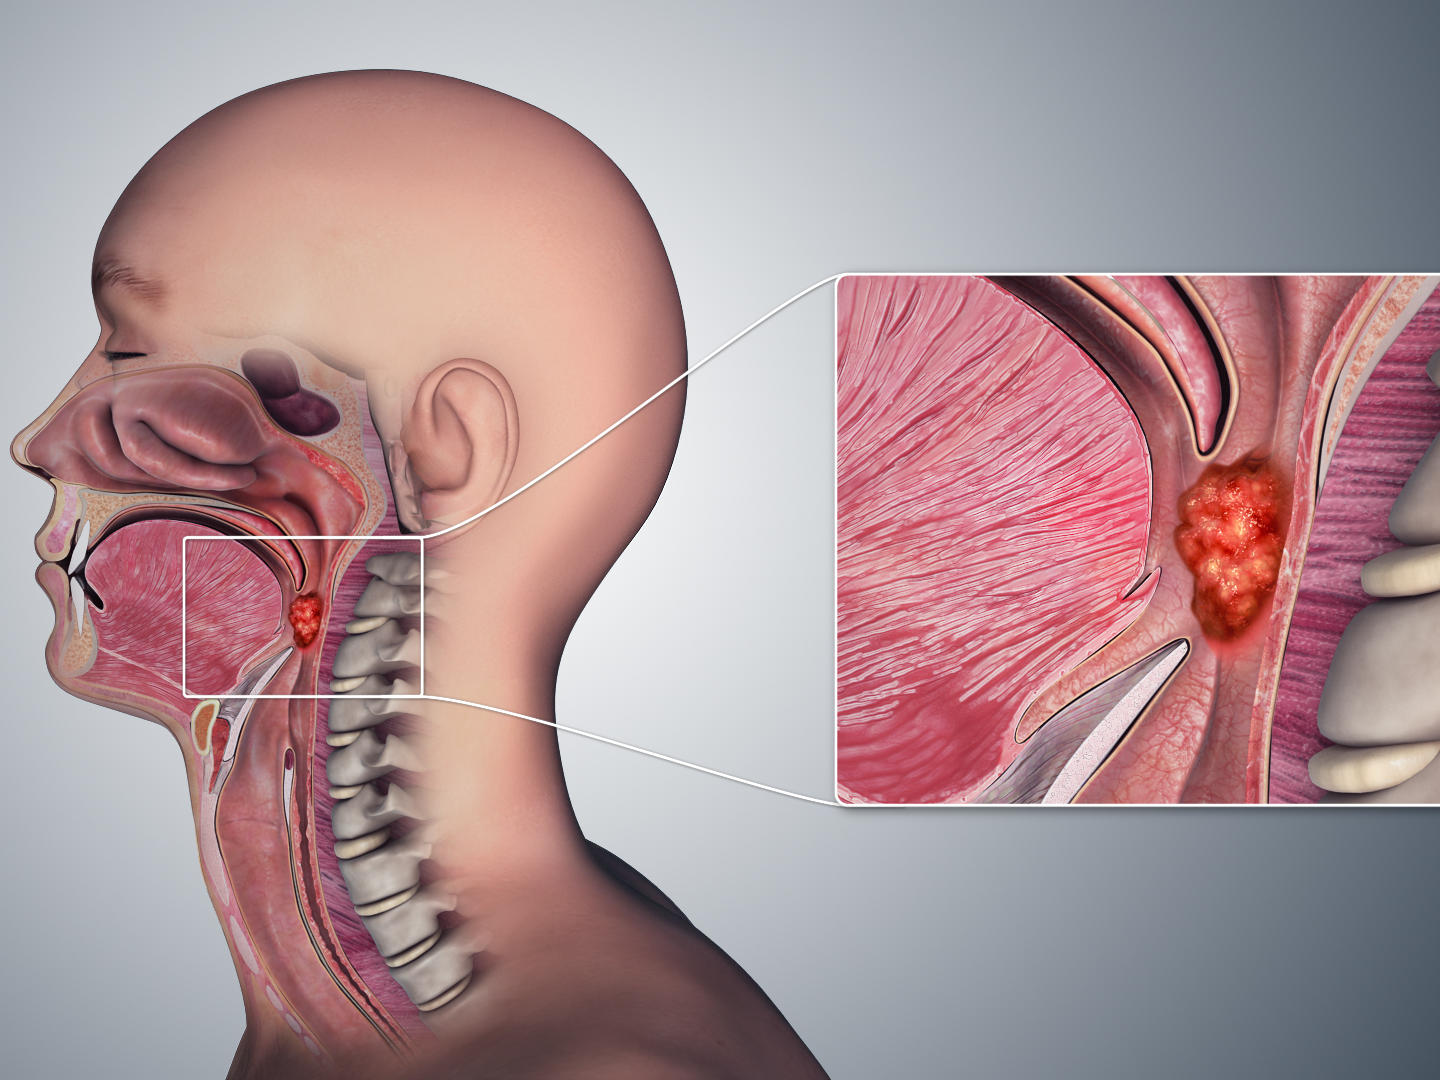 Natural treatment for hpv throat cancer - Hpv throat cancer natural treatment